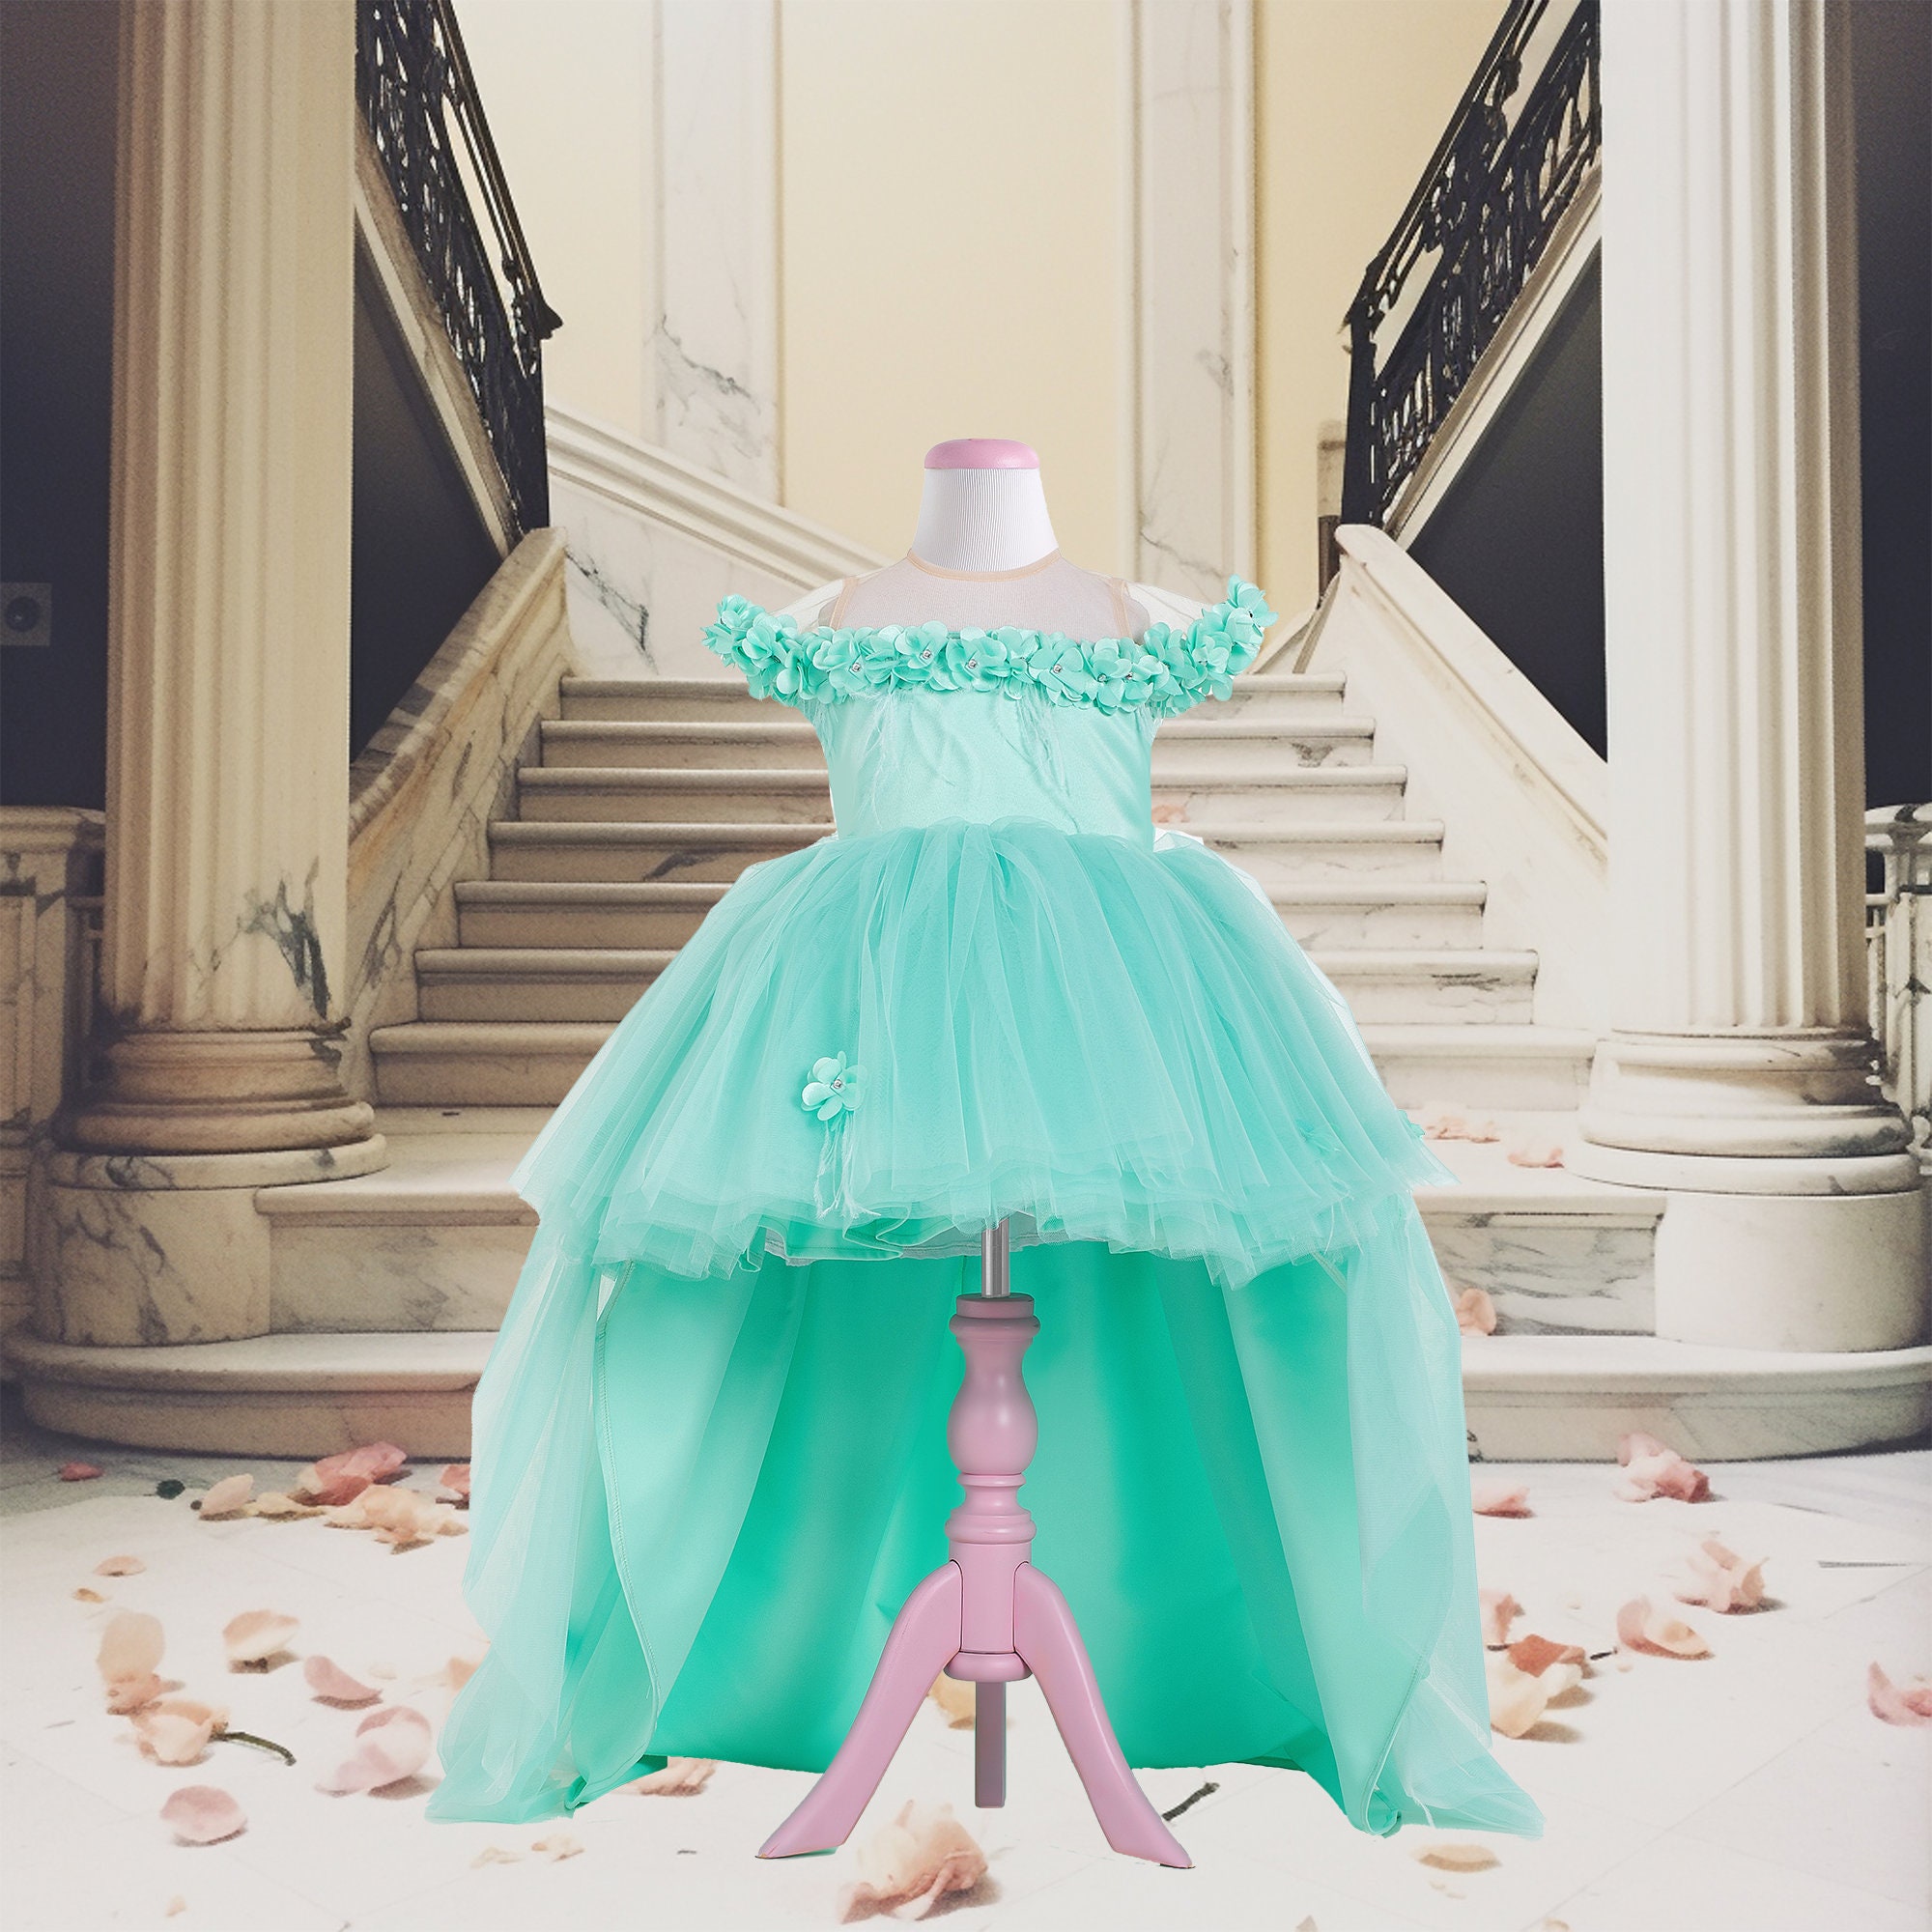 Green Mint Tulle Fairy Prom Ball Gown. Blue Turquoise Floral